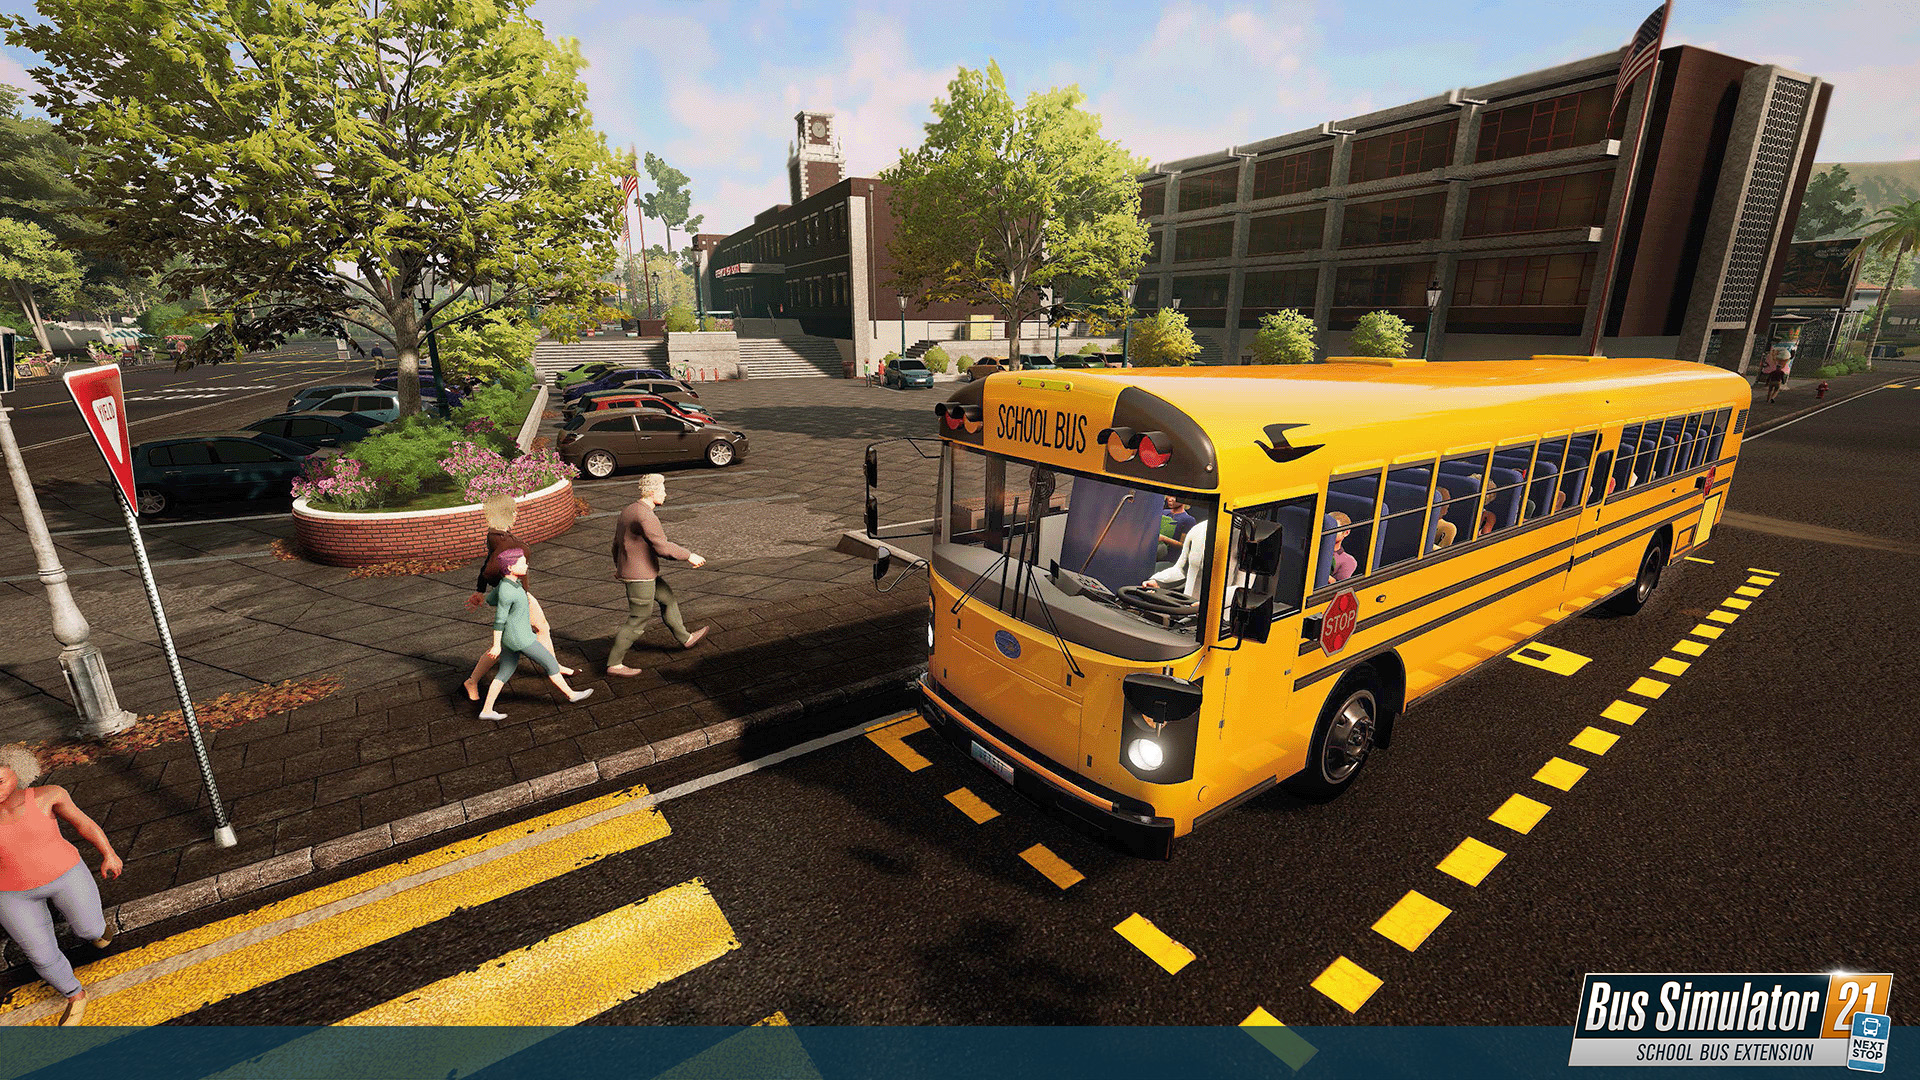 Official School Bus Extension